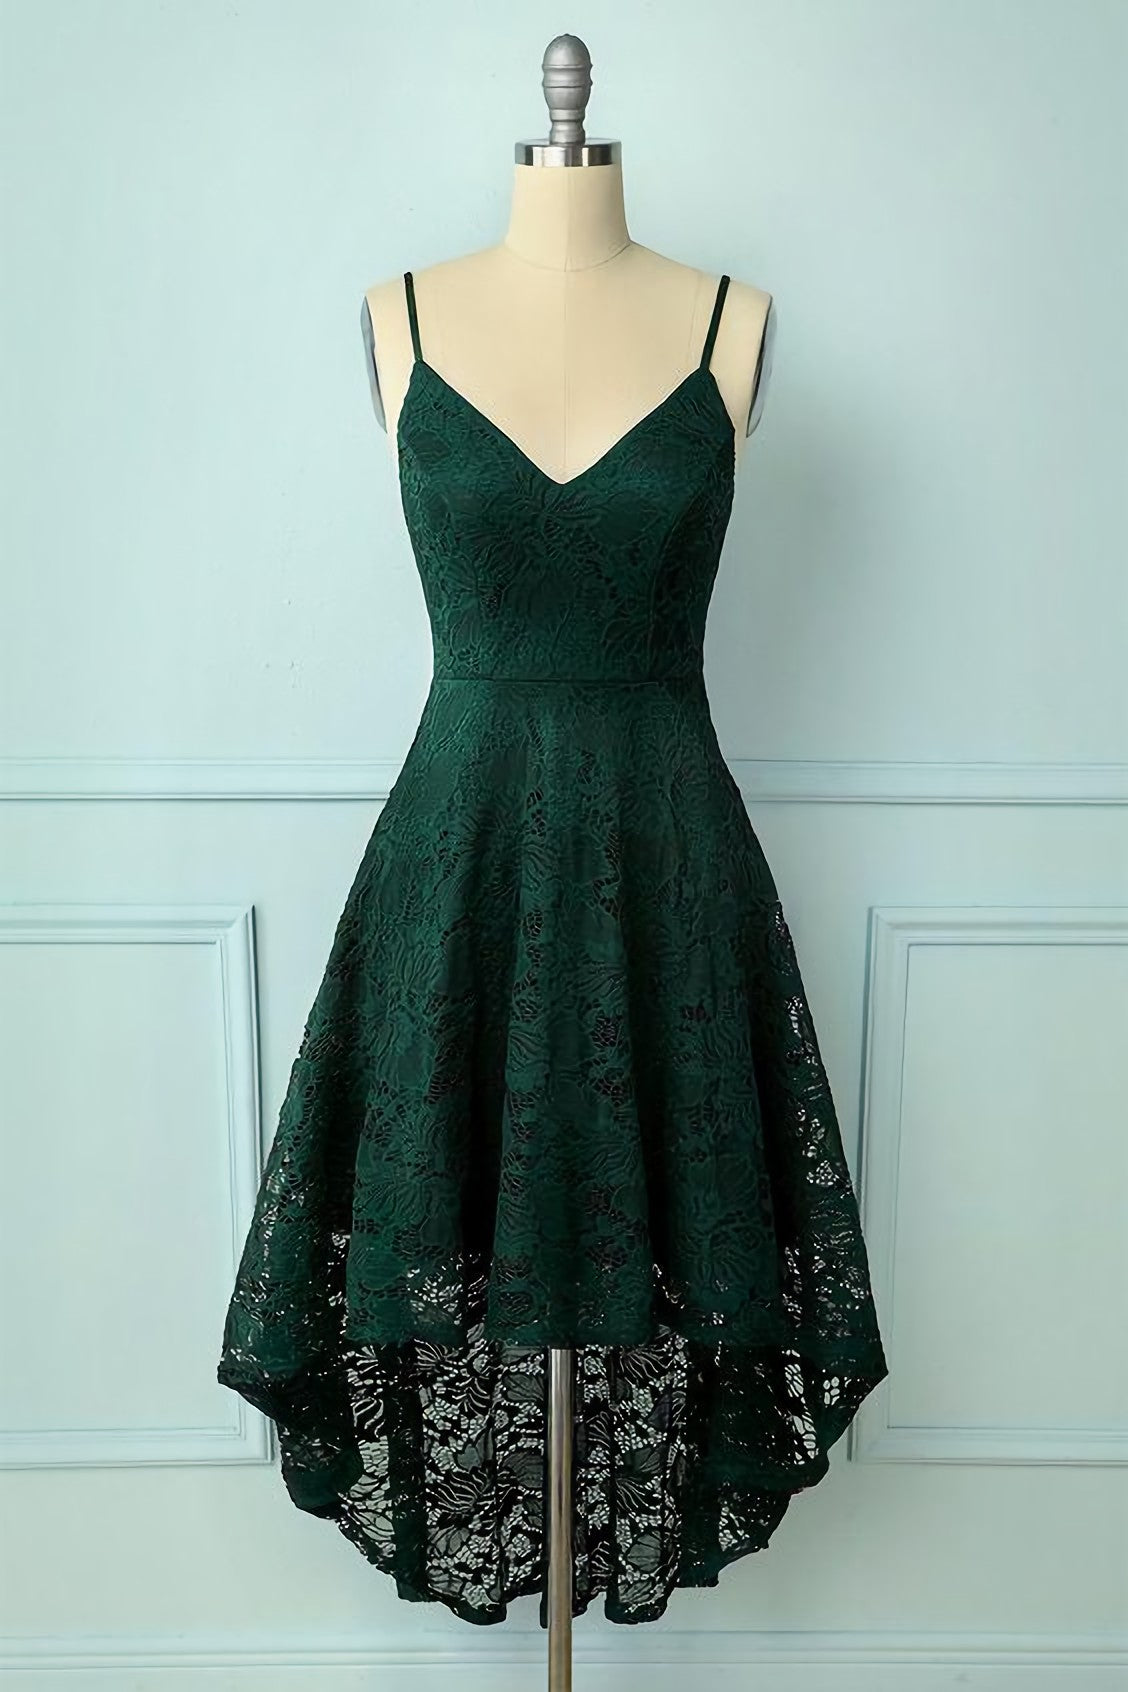 Vintage Style Dark Green Lace Shoulders Straps Corset Prom Dress outfits, Evening Dress Yellow